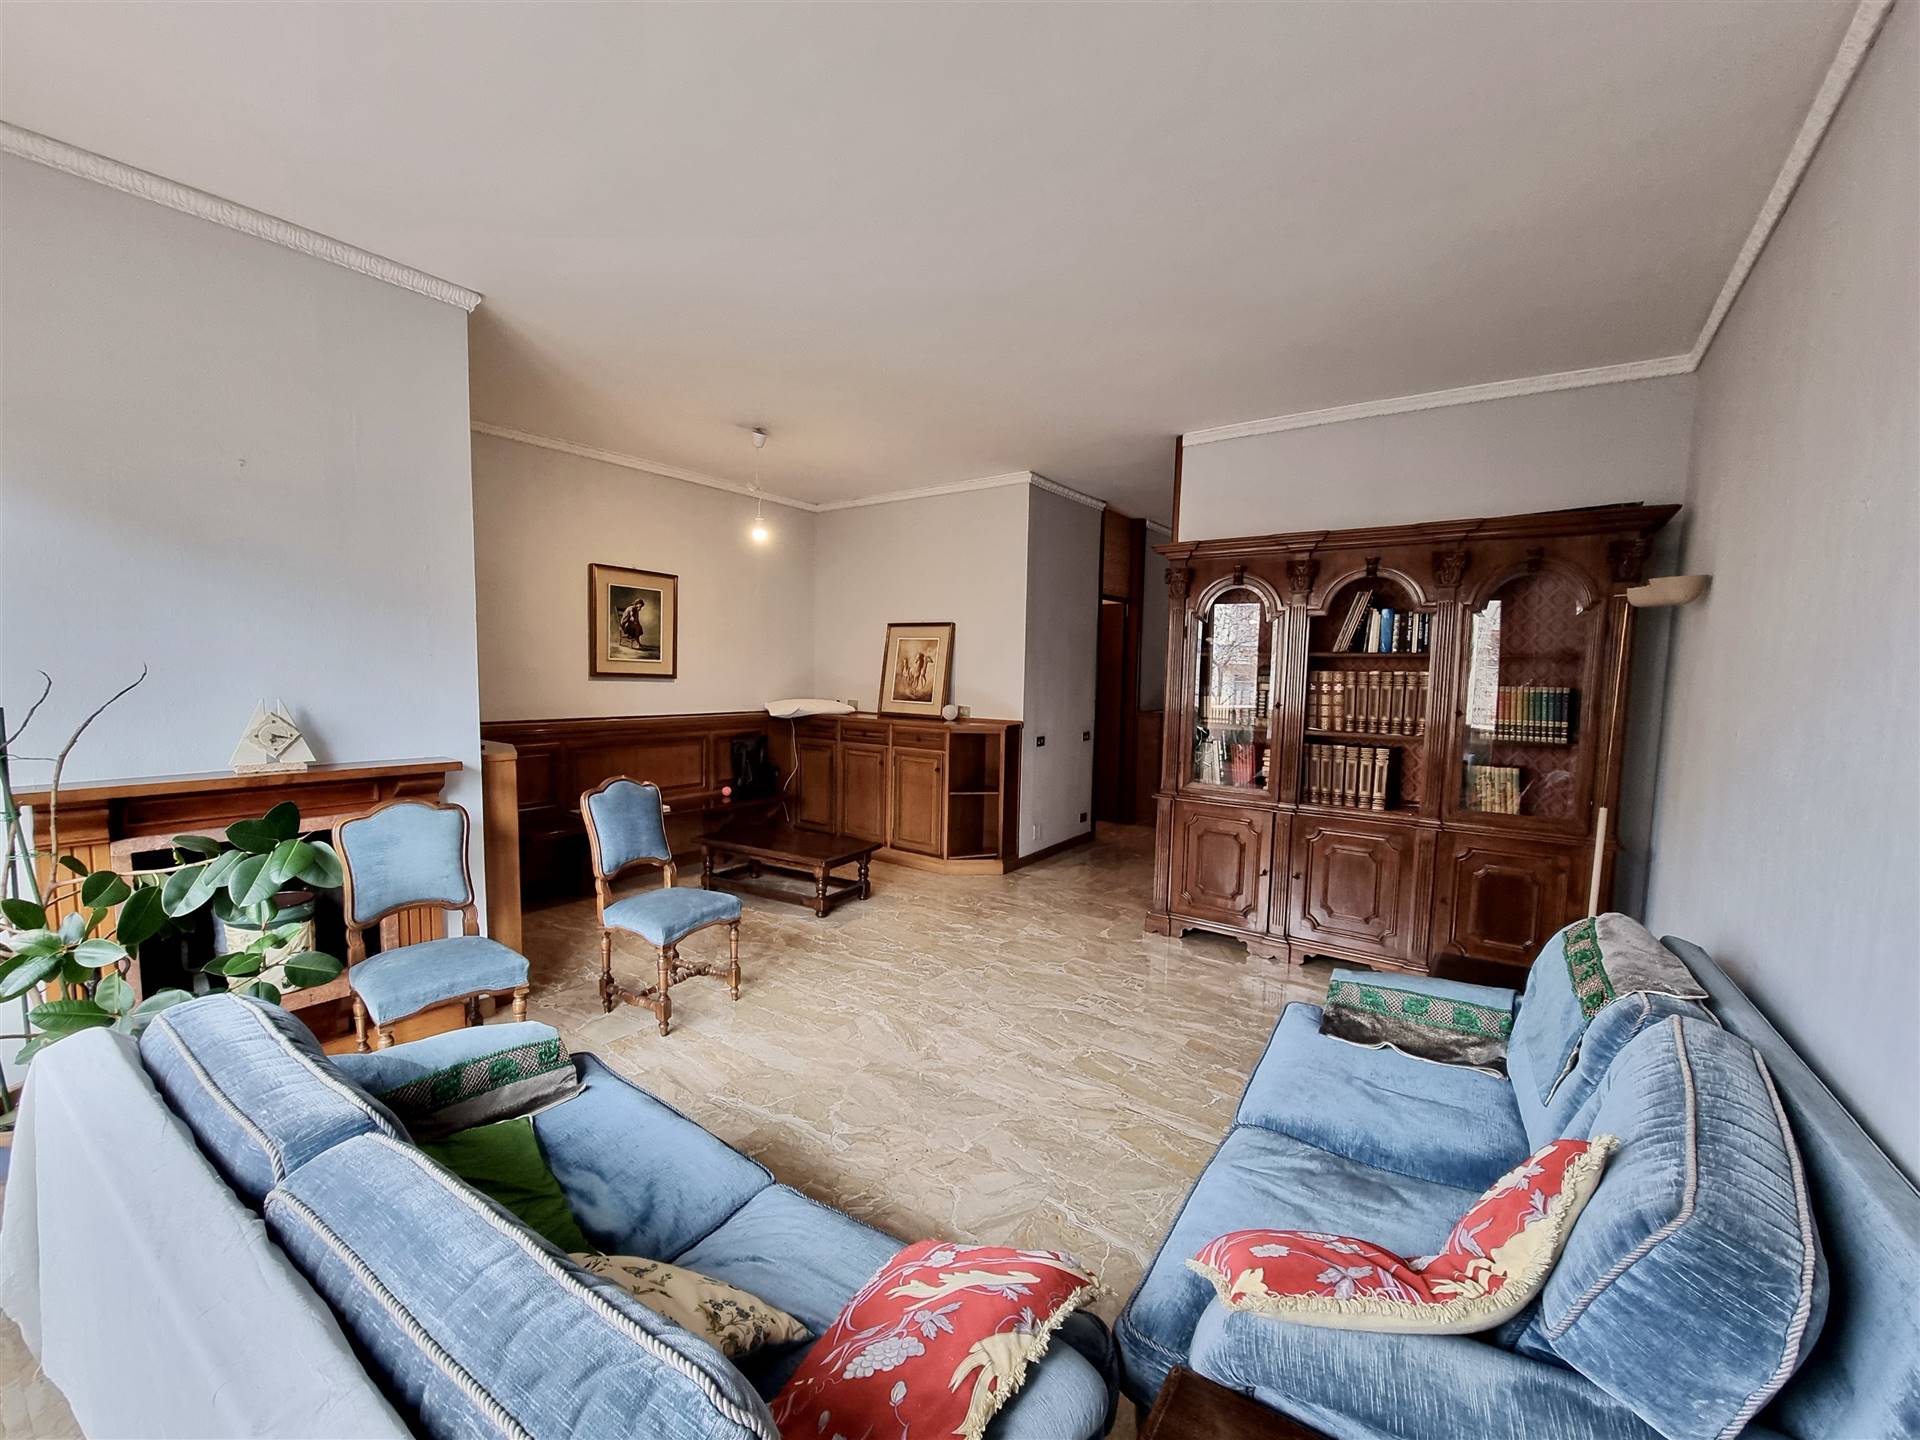 FIRENZE, MILANO, Apartment for sale of 125 Sq. mt., Be restored, Heating Centralized, Energetic class: G, Epi: 175 kwh/m2 year, placed at 4° on 7, composed by: 4 Rooms, Separate kitchen, , 3 Bedrooms,